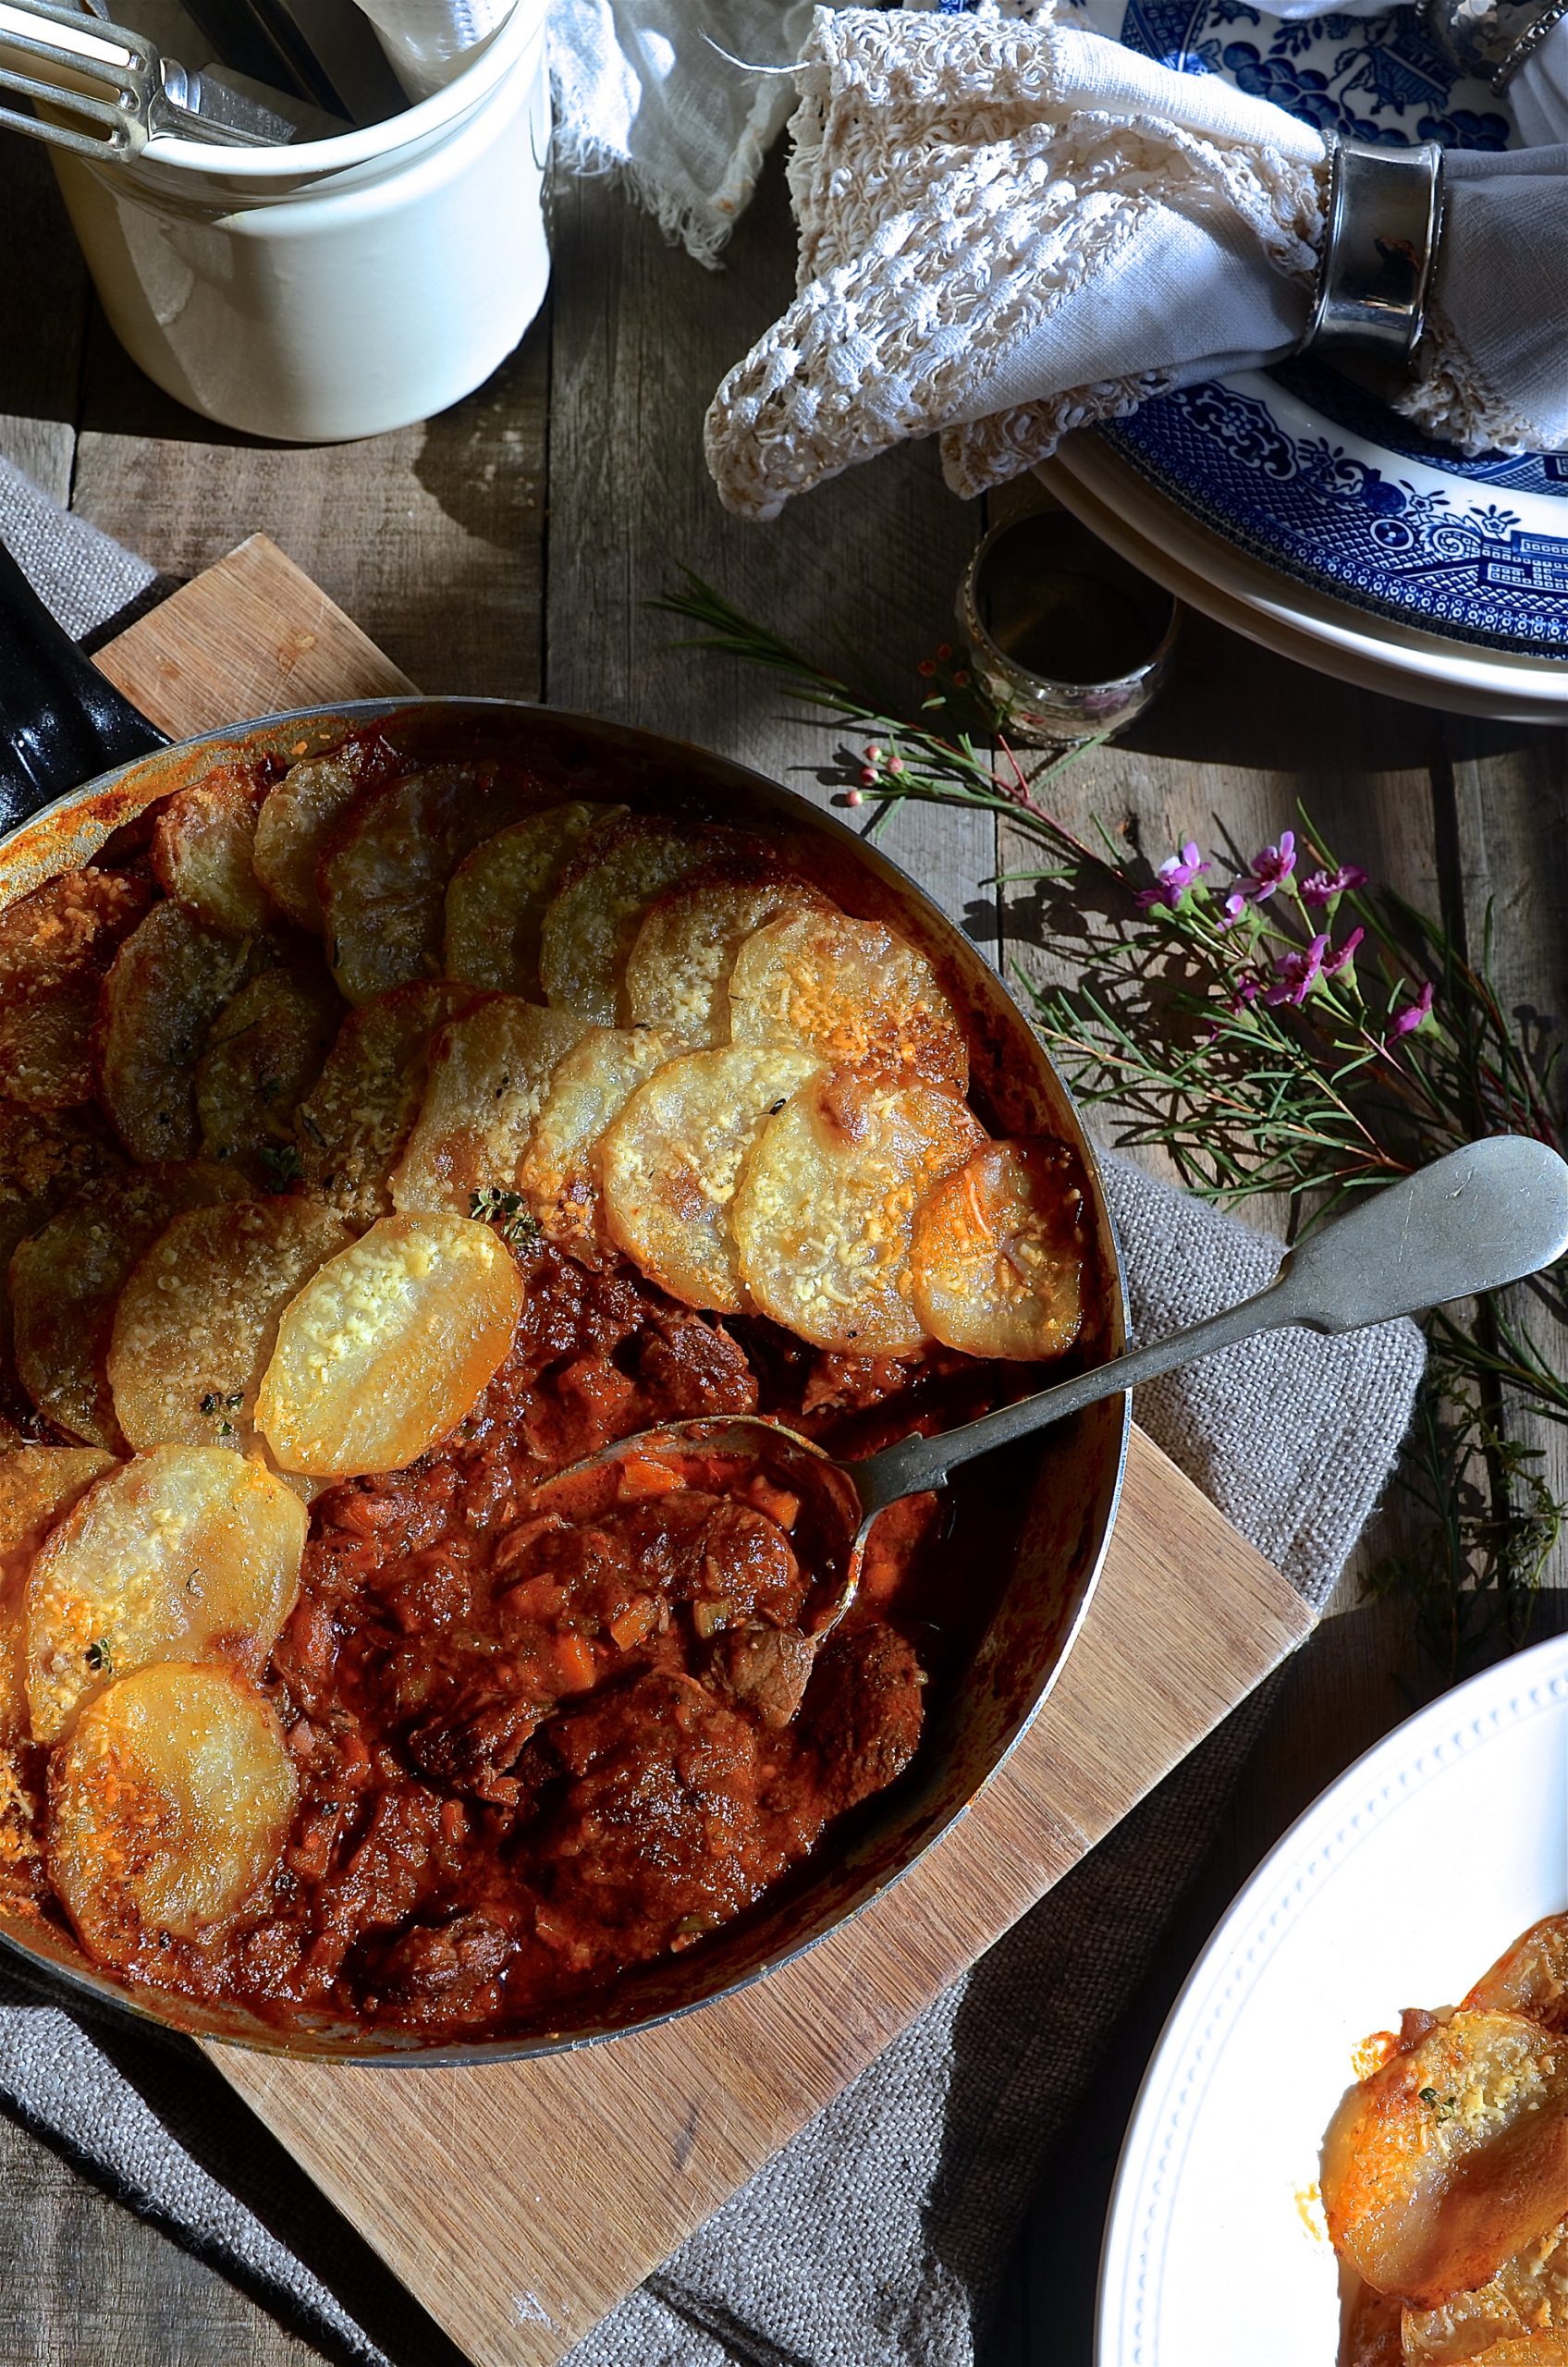 Red wine beef stew with potato gratin